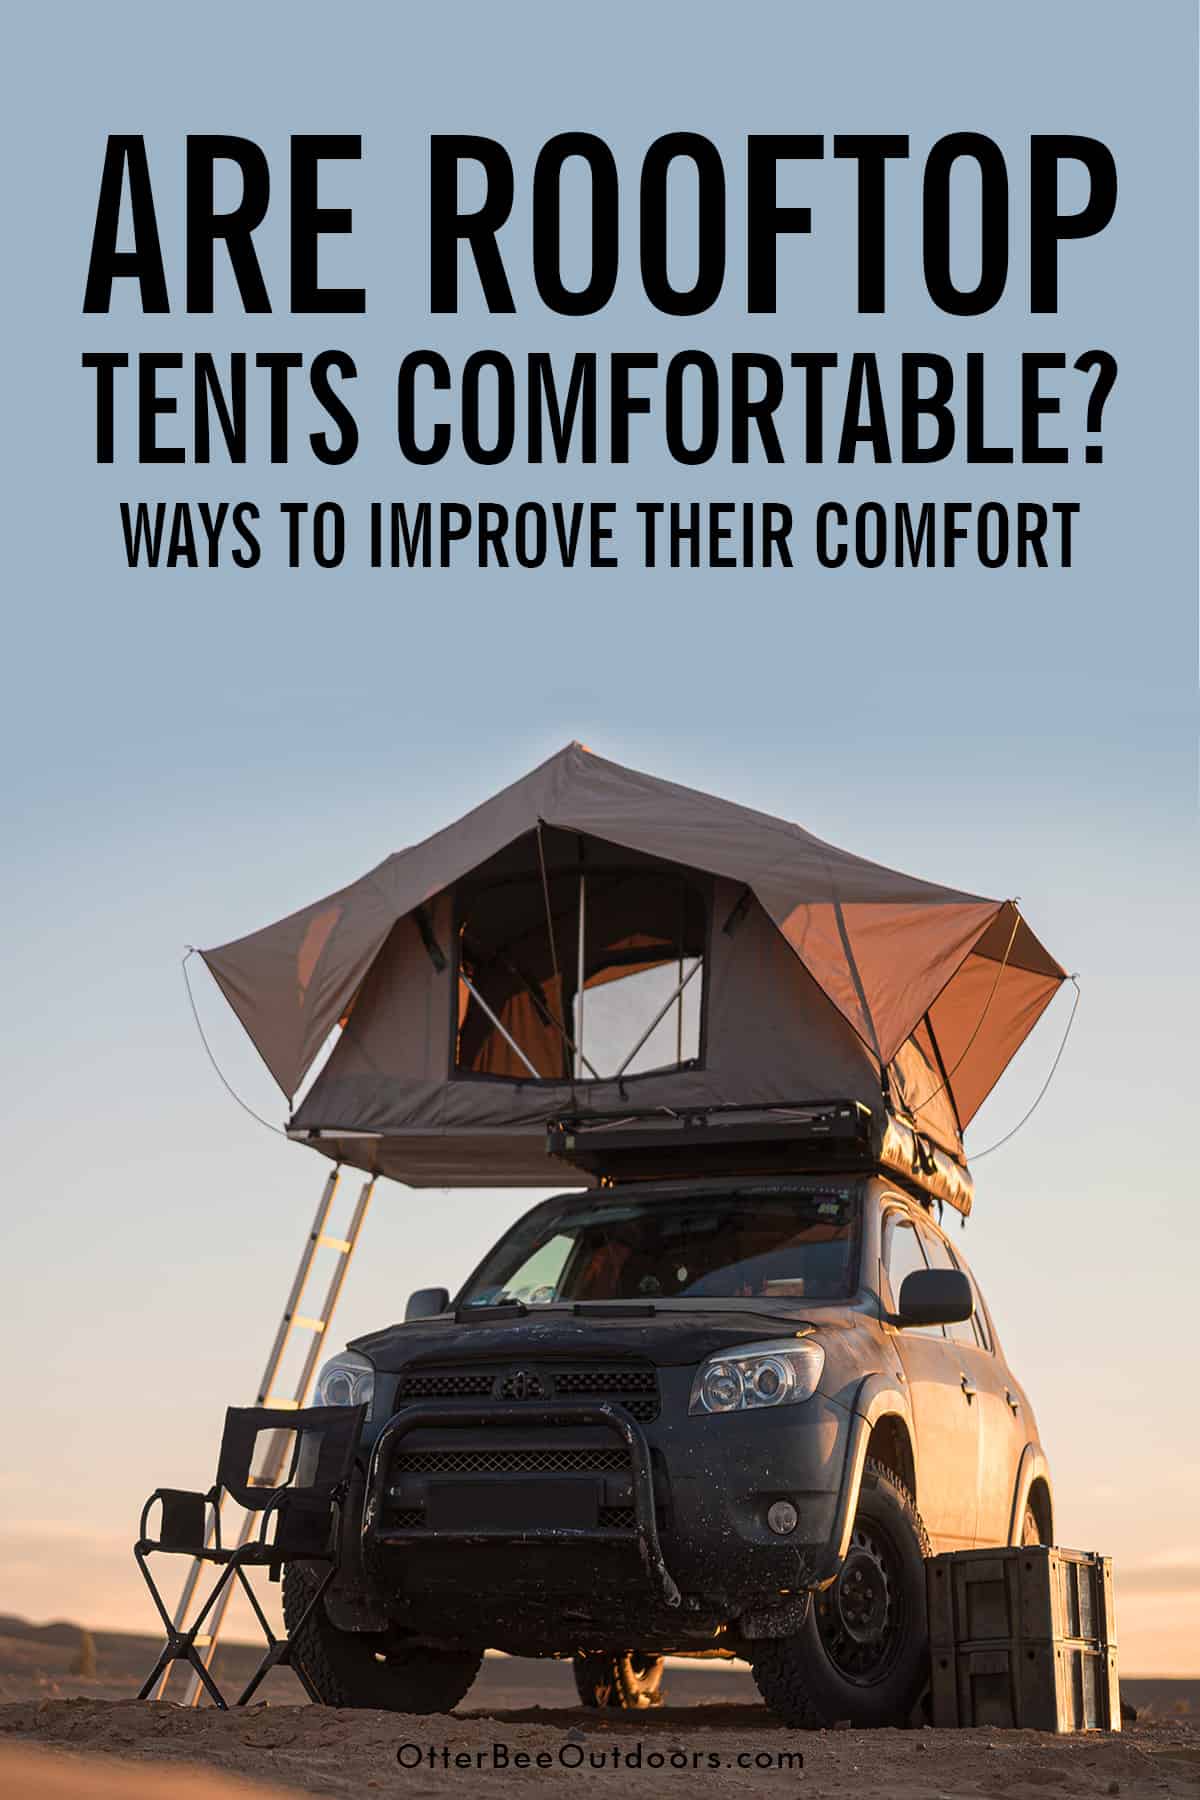 Camping in the desert with a soft shell rooftop tent. The graphic asks... Are rooftop tents comfortable?... Ways to improve their comfort.